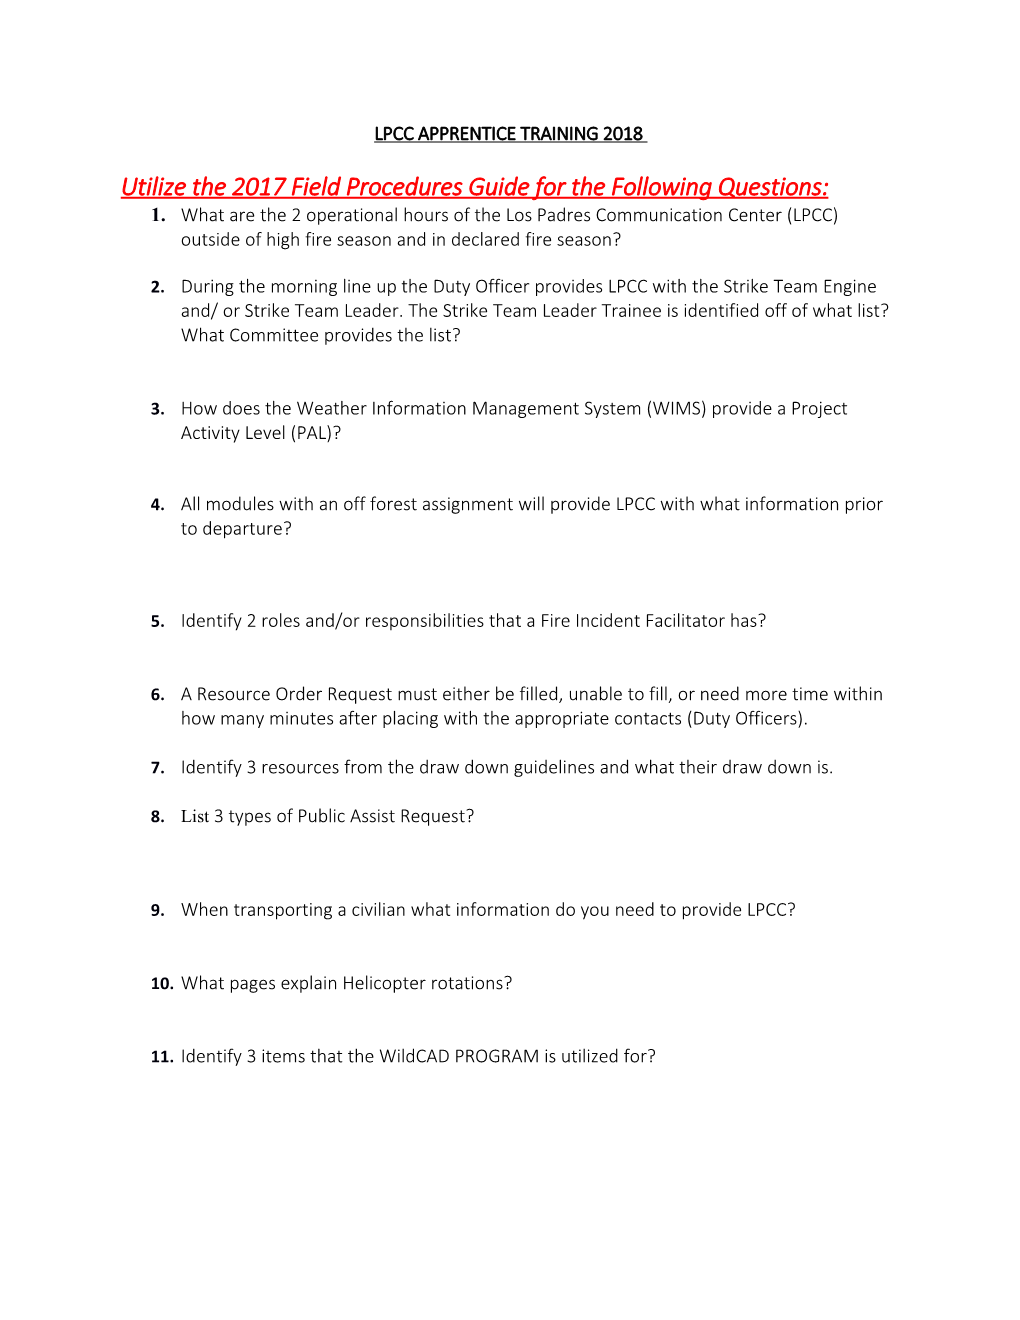 Utilize the 2017Field Procedures Guide for the Following Questions